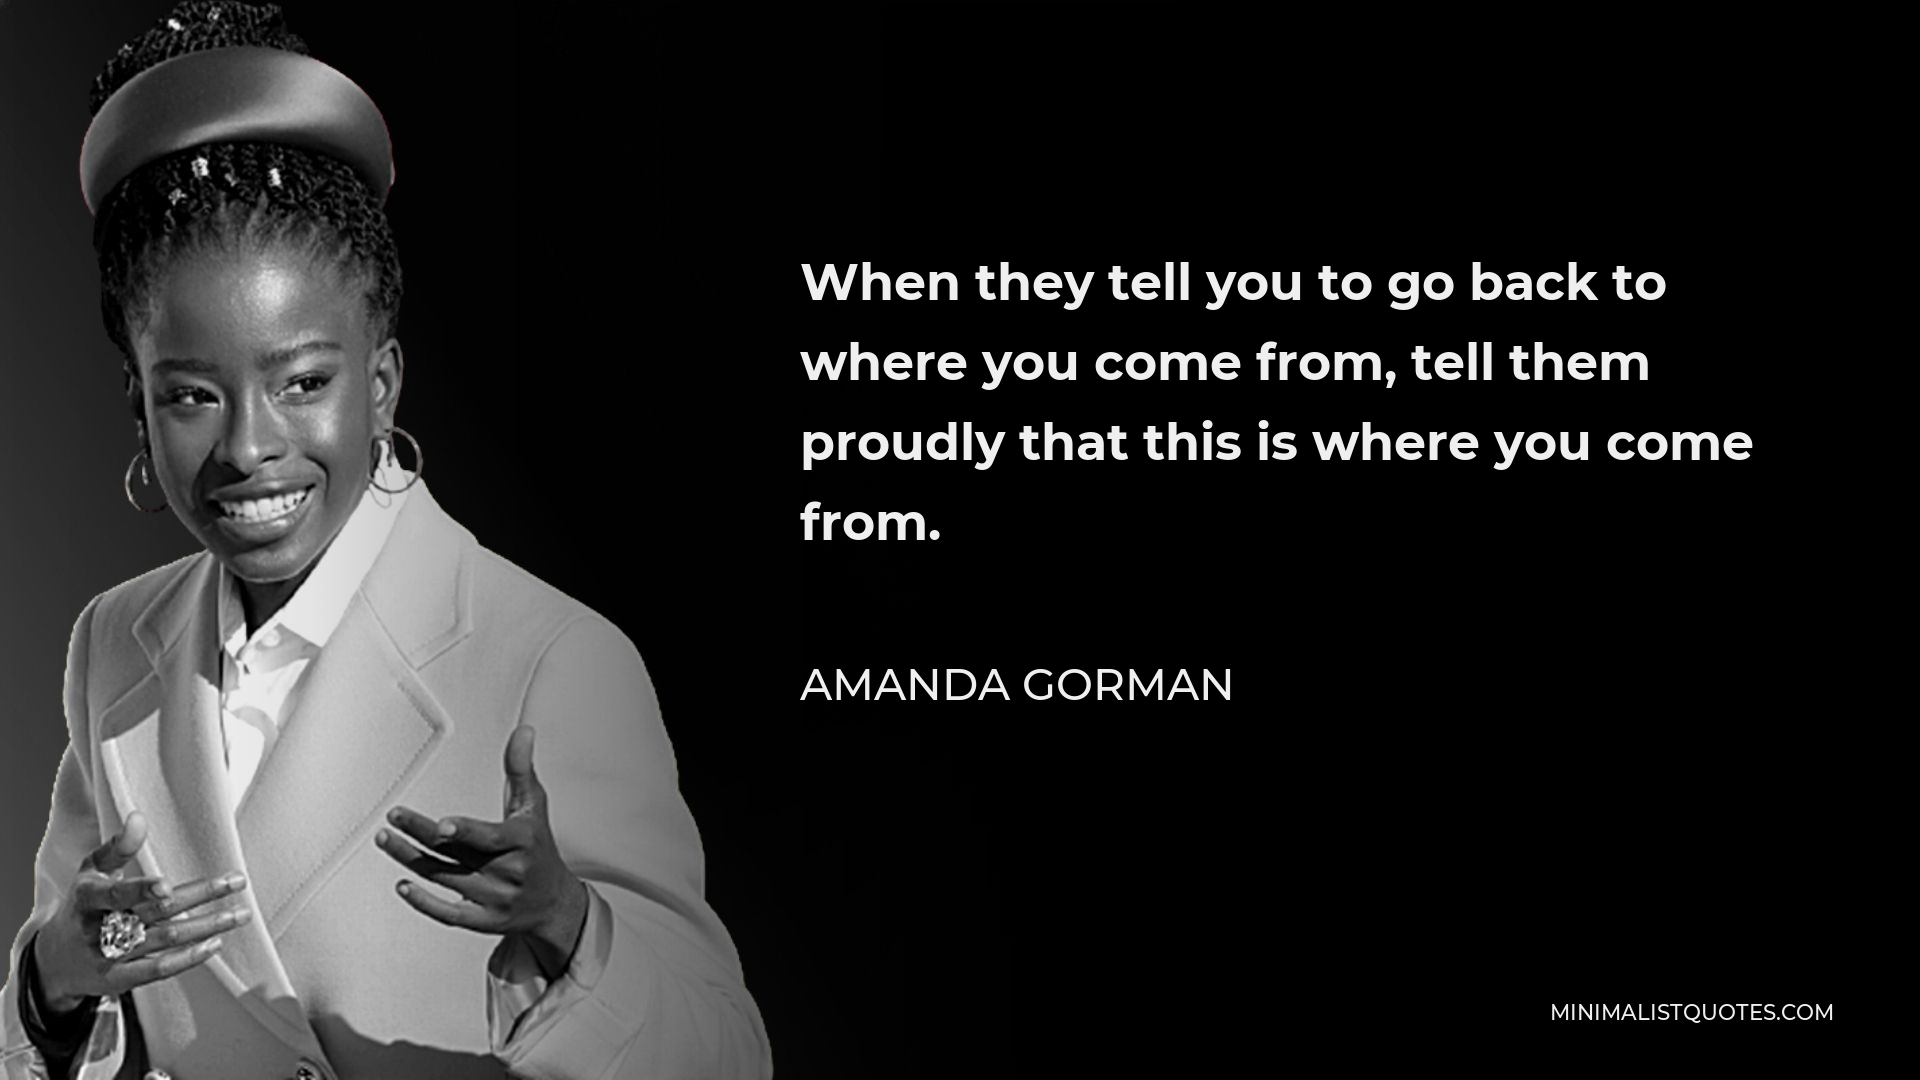 Amanda Gorman Quote - When they tell you to go back to where you come from, tell them proudly that this is where you come from.